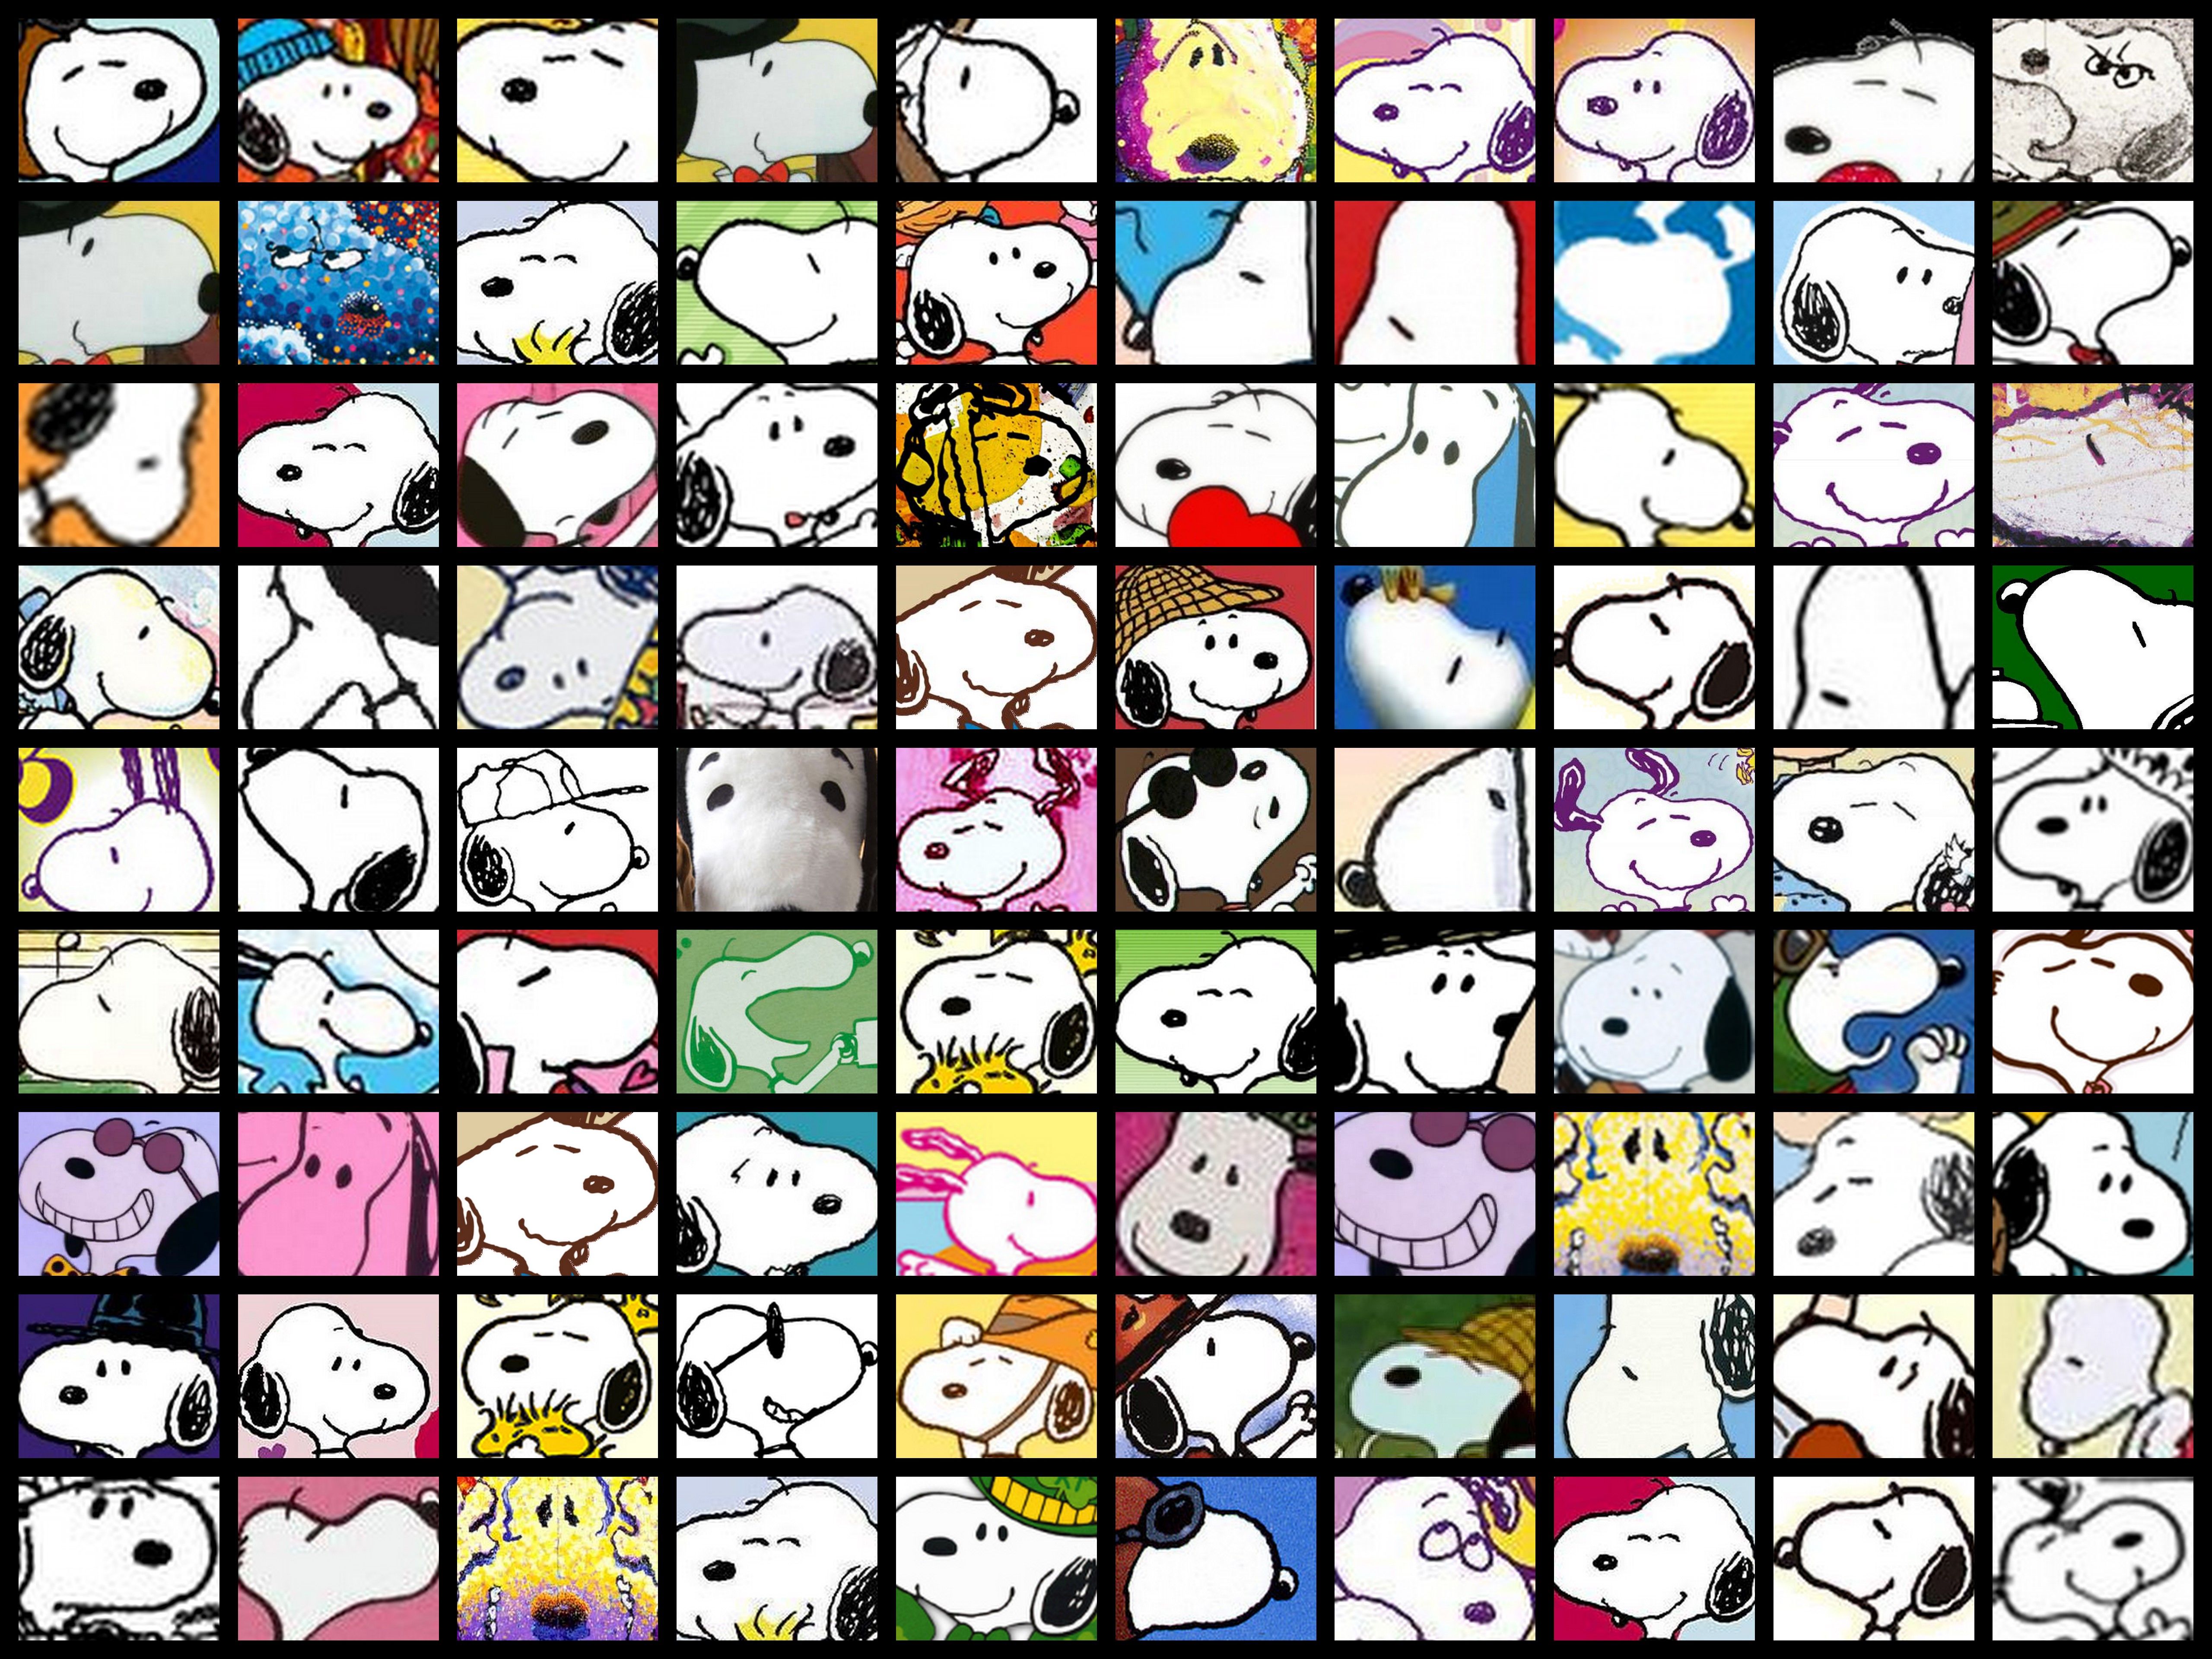 It's Snoopy COLLAGE! Woohoo #Snoopy #Peanuts